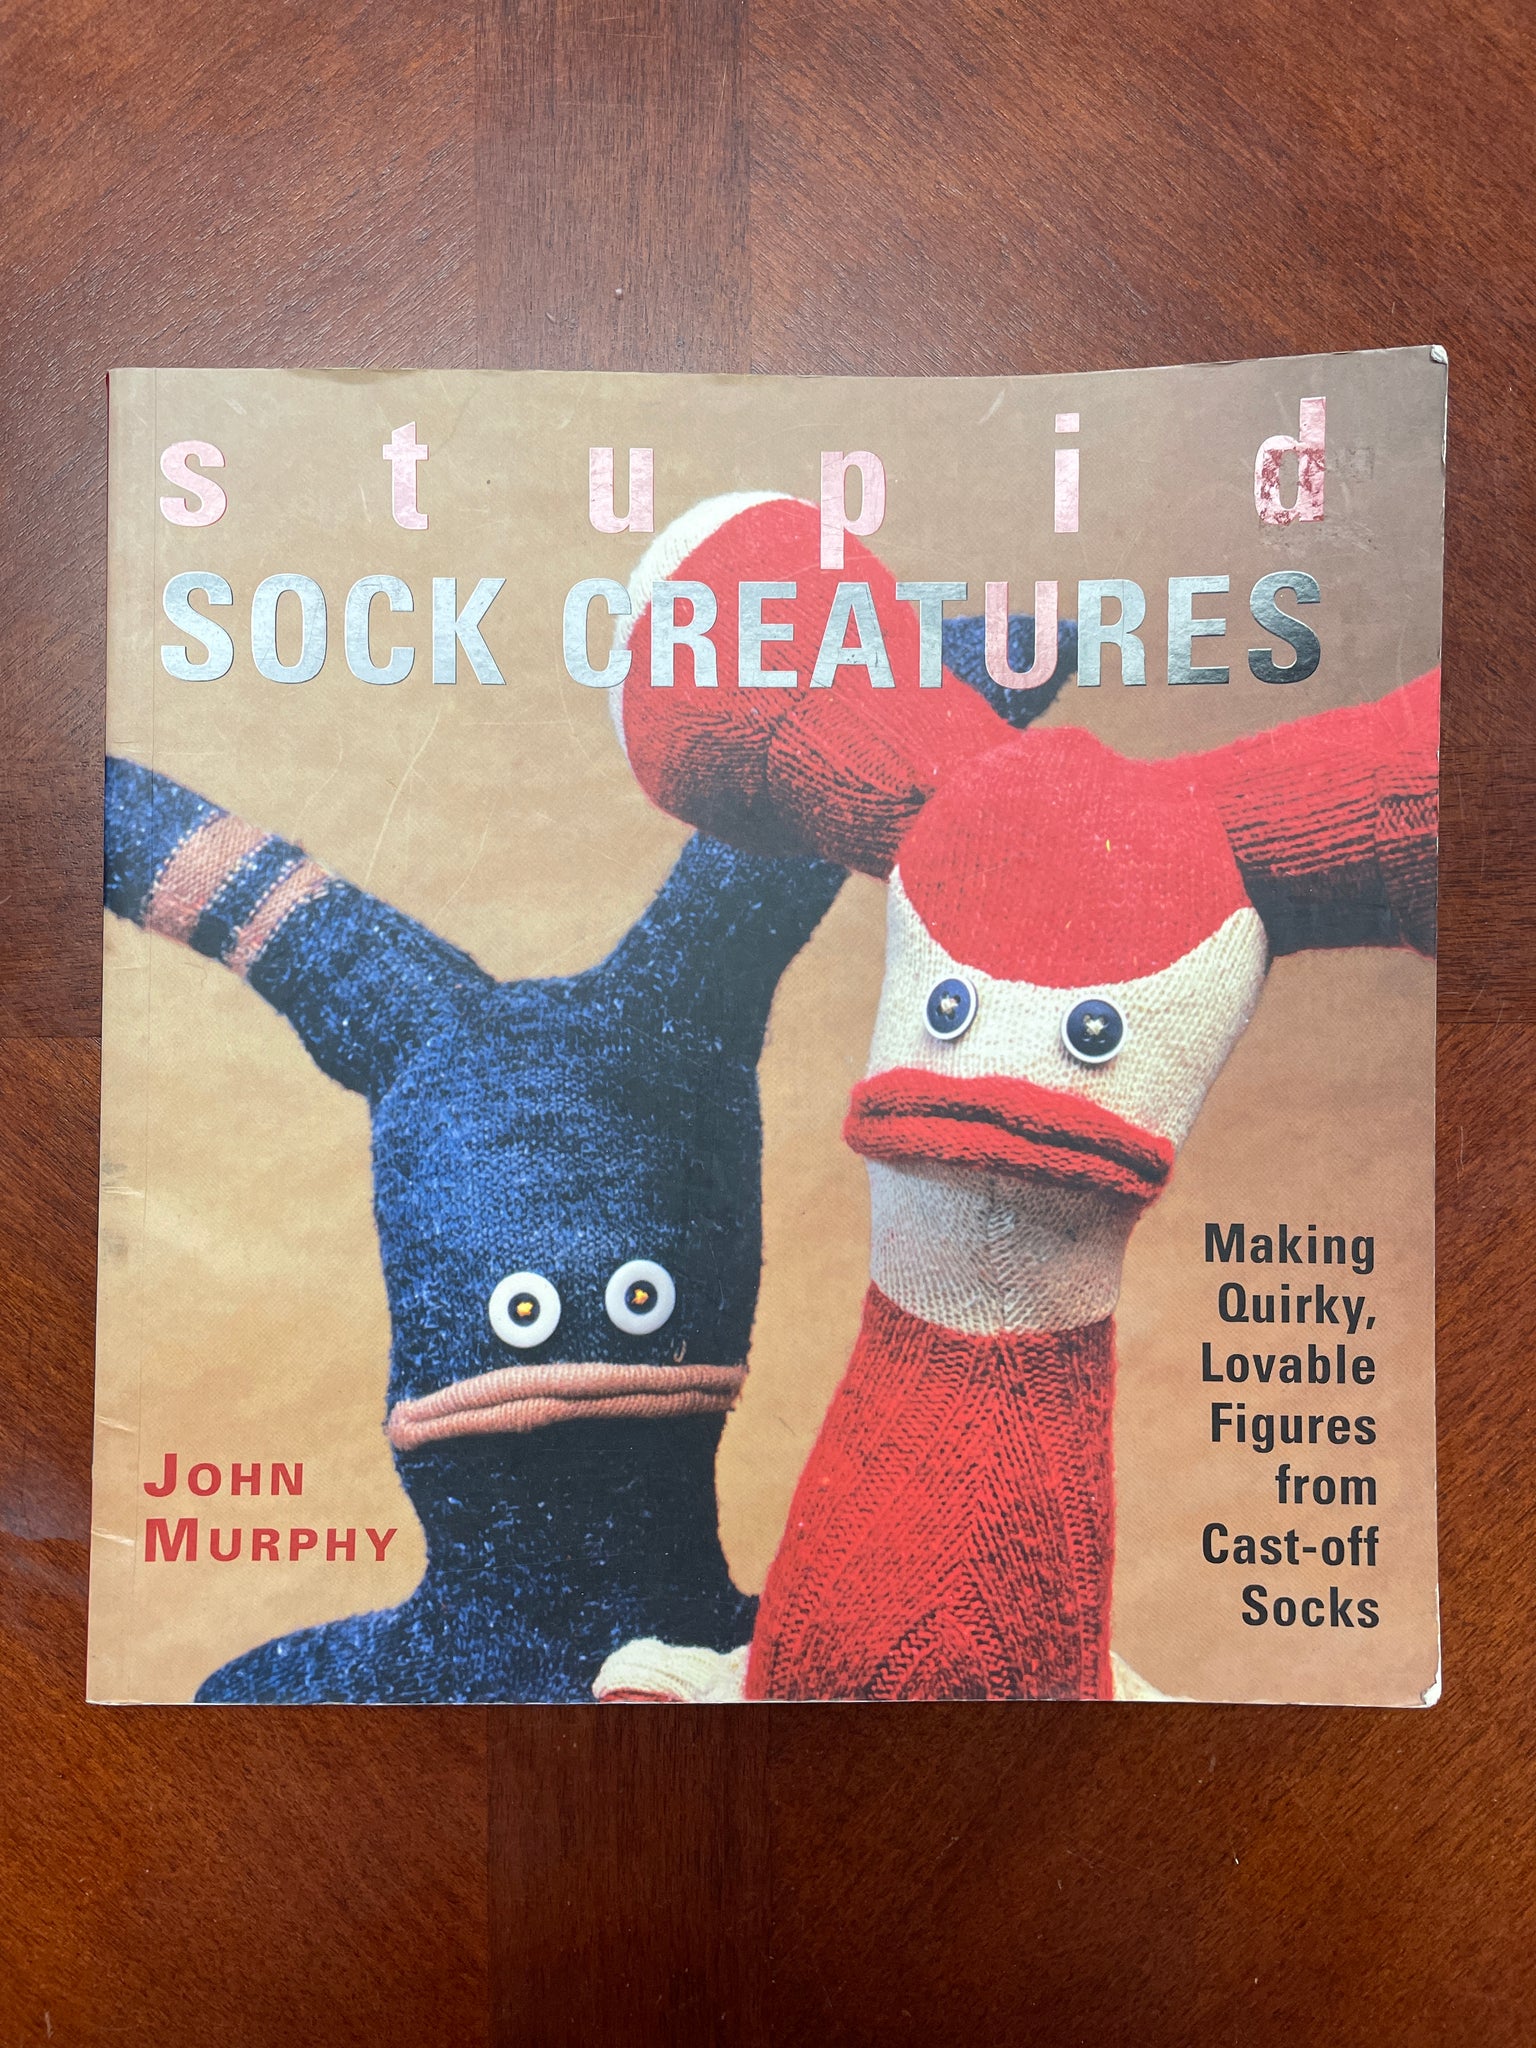 2005 Doll Making Book - "Stupid Sock Creatures"